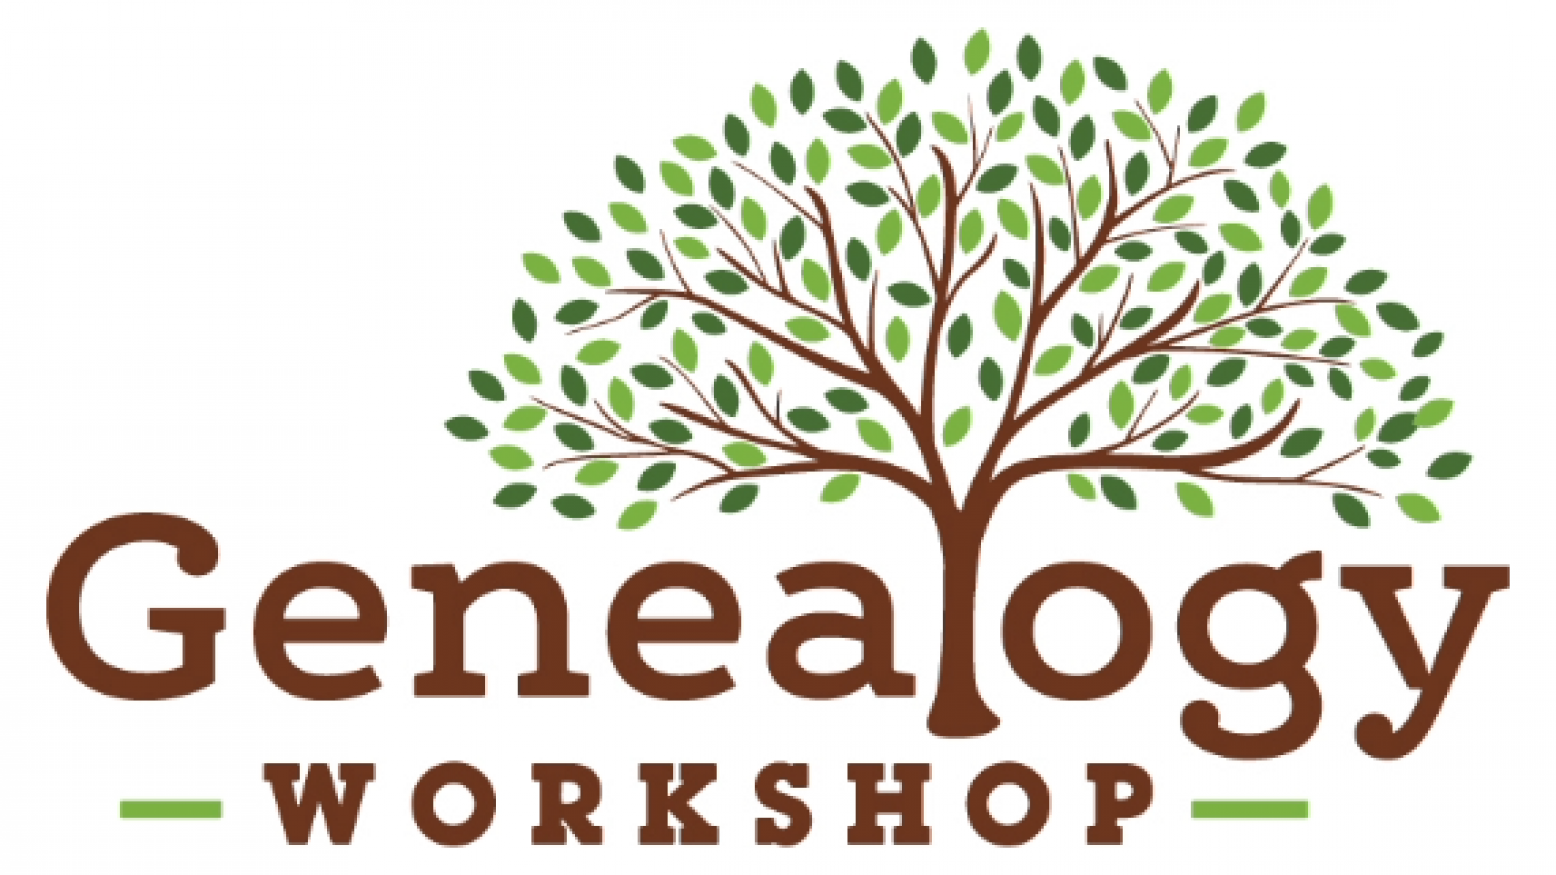 Green tree on a white background with the text Genealogy Workshop